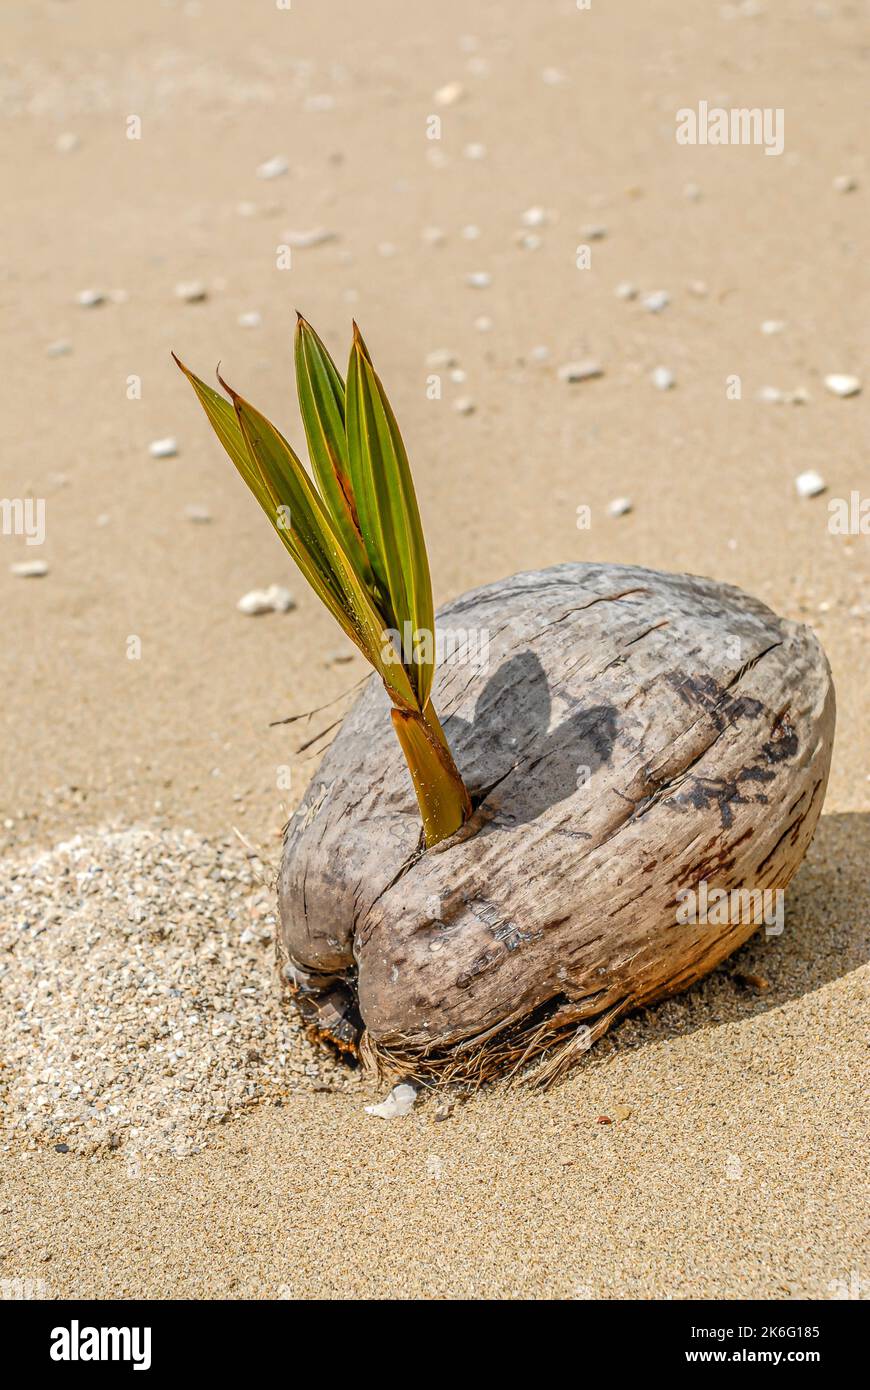 Closeup of young coconut tree sprout growing from a coconut at a beach Stock Photo